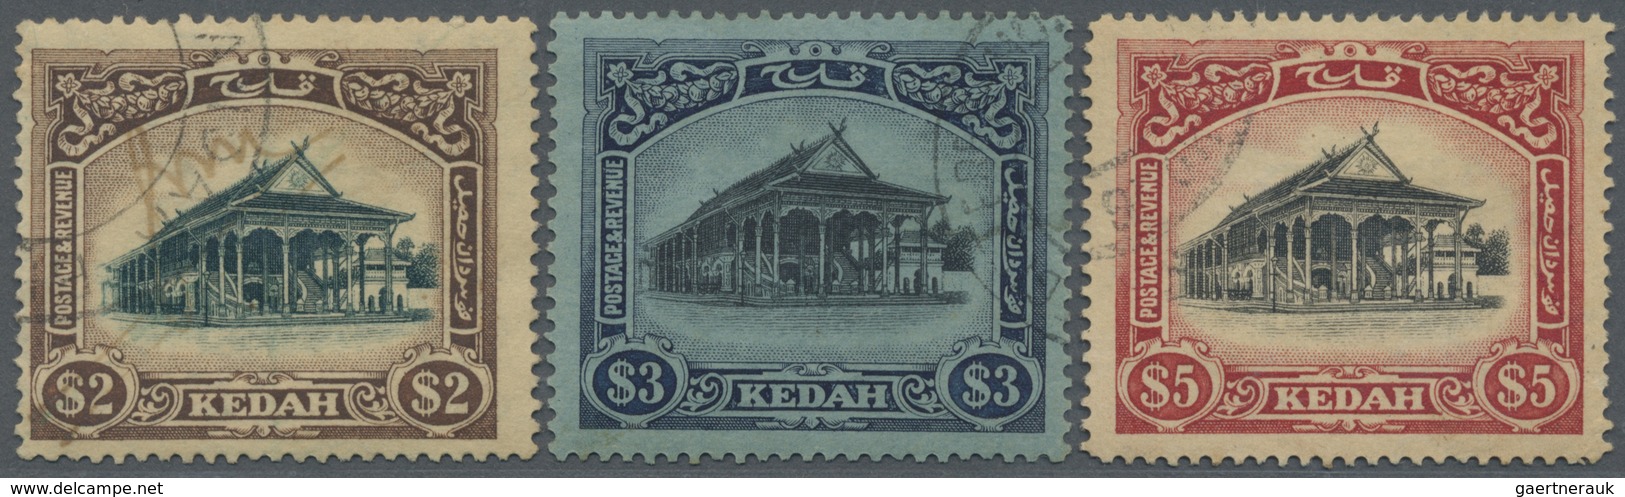 O Malaiische Staaten - Kedah: 1924/1926, 'Council Chamber' $2, $3 And $5 With Wmk. CROWN TO LEFT OF CA - Kedah